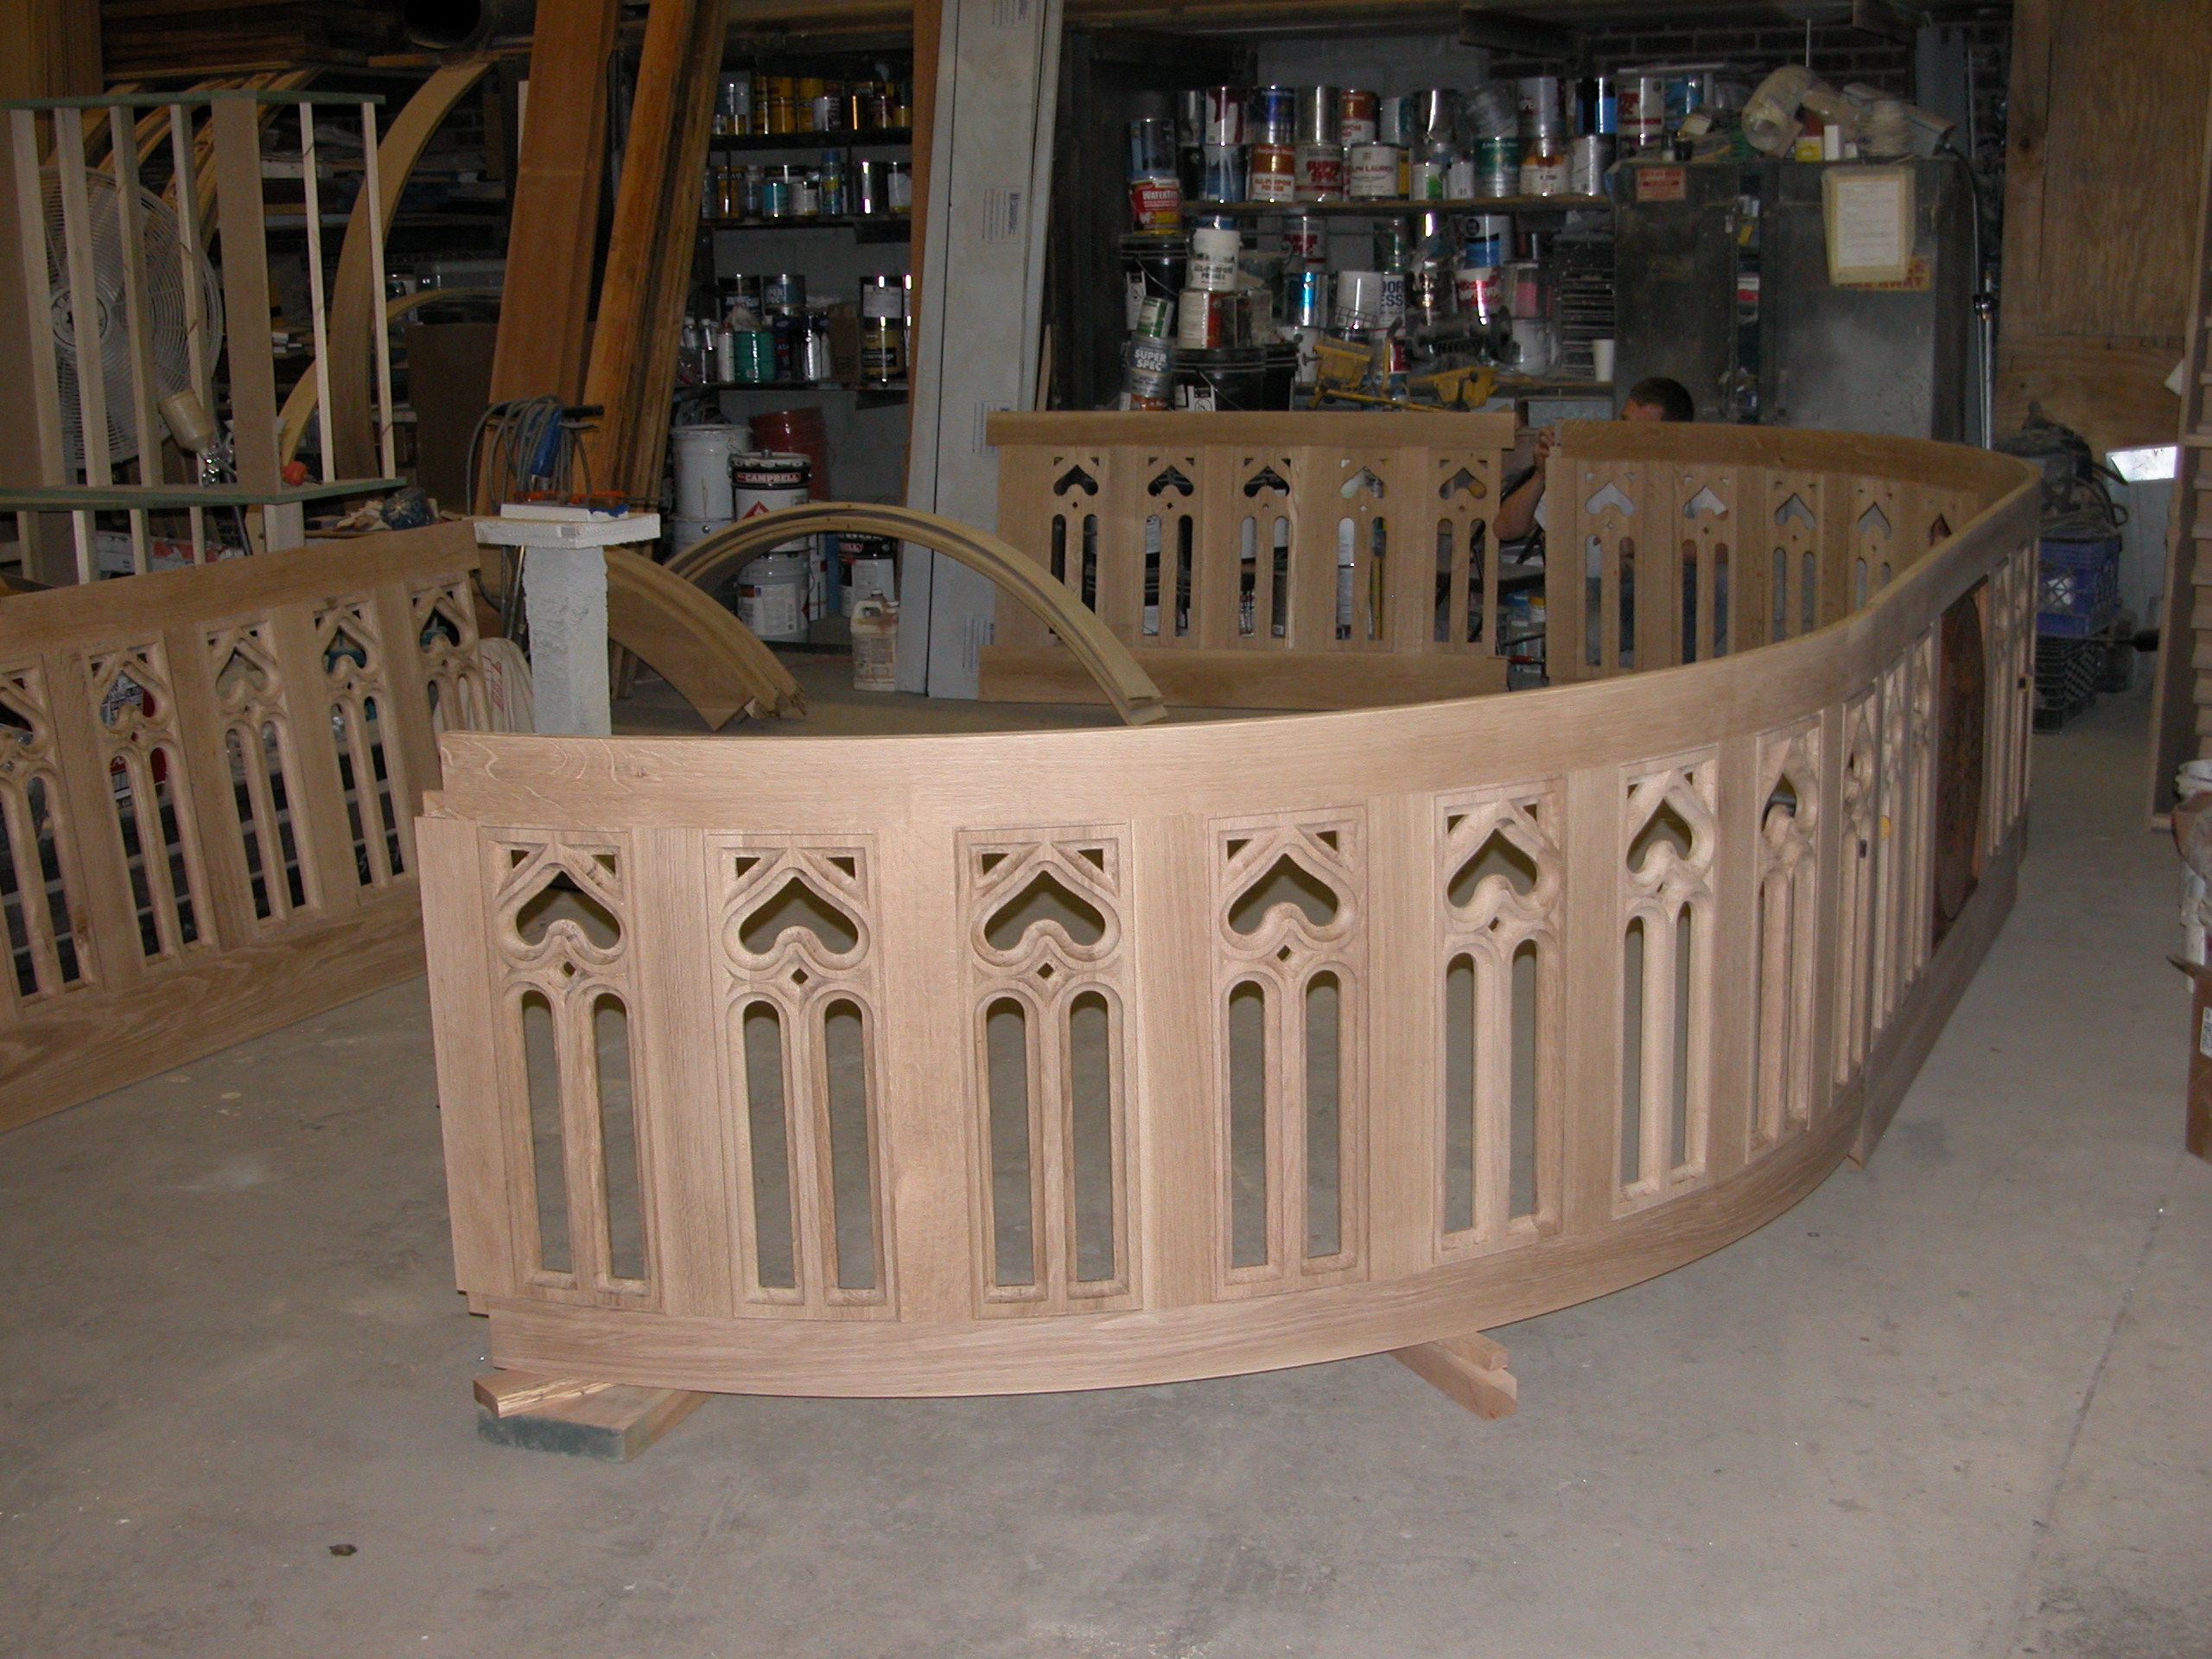 In-progress photo of the wooden choir stage railing at Fordham University, showcasing the construction of a new wooden railing system for the stage area